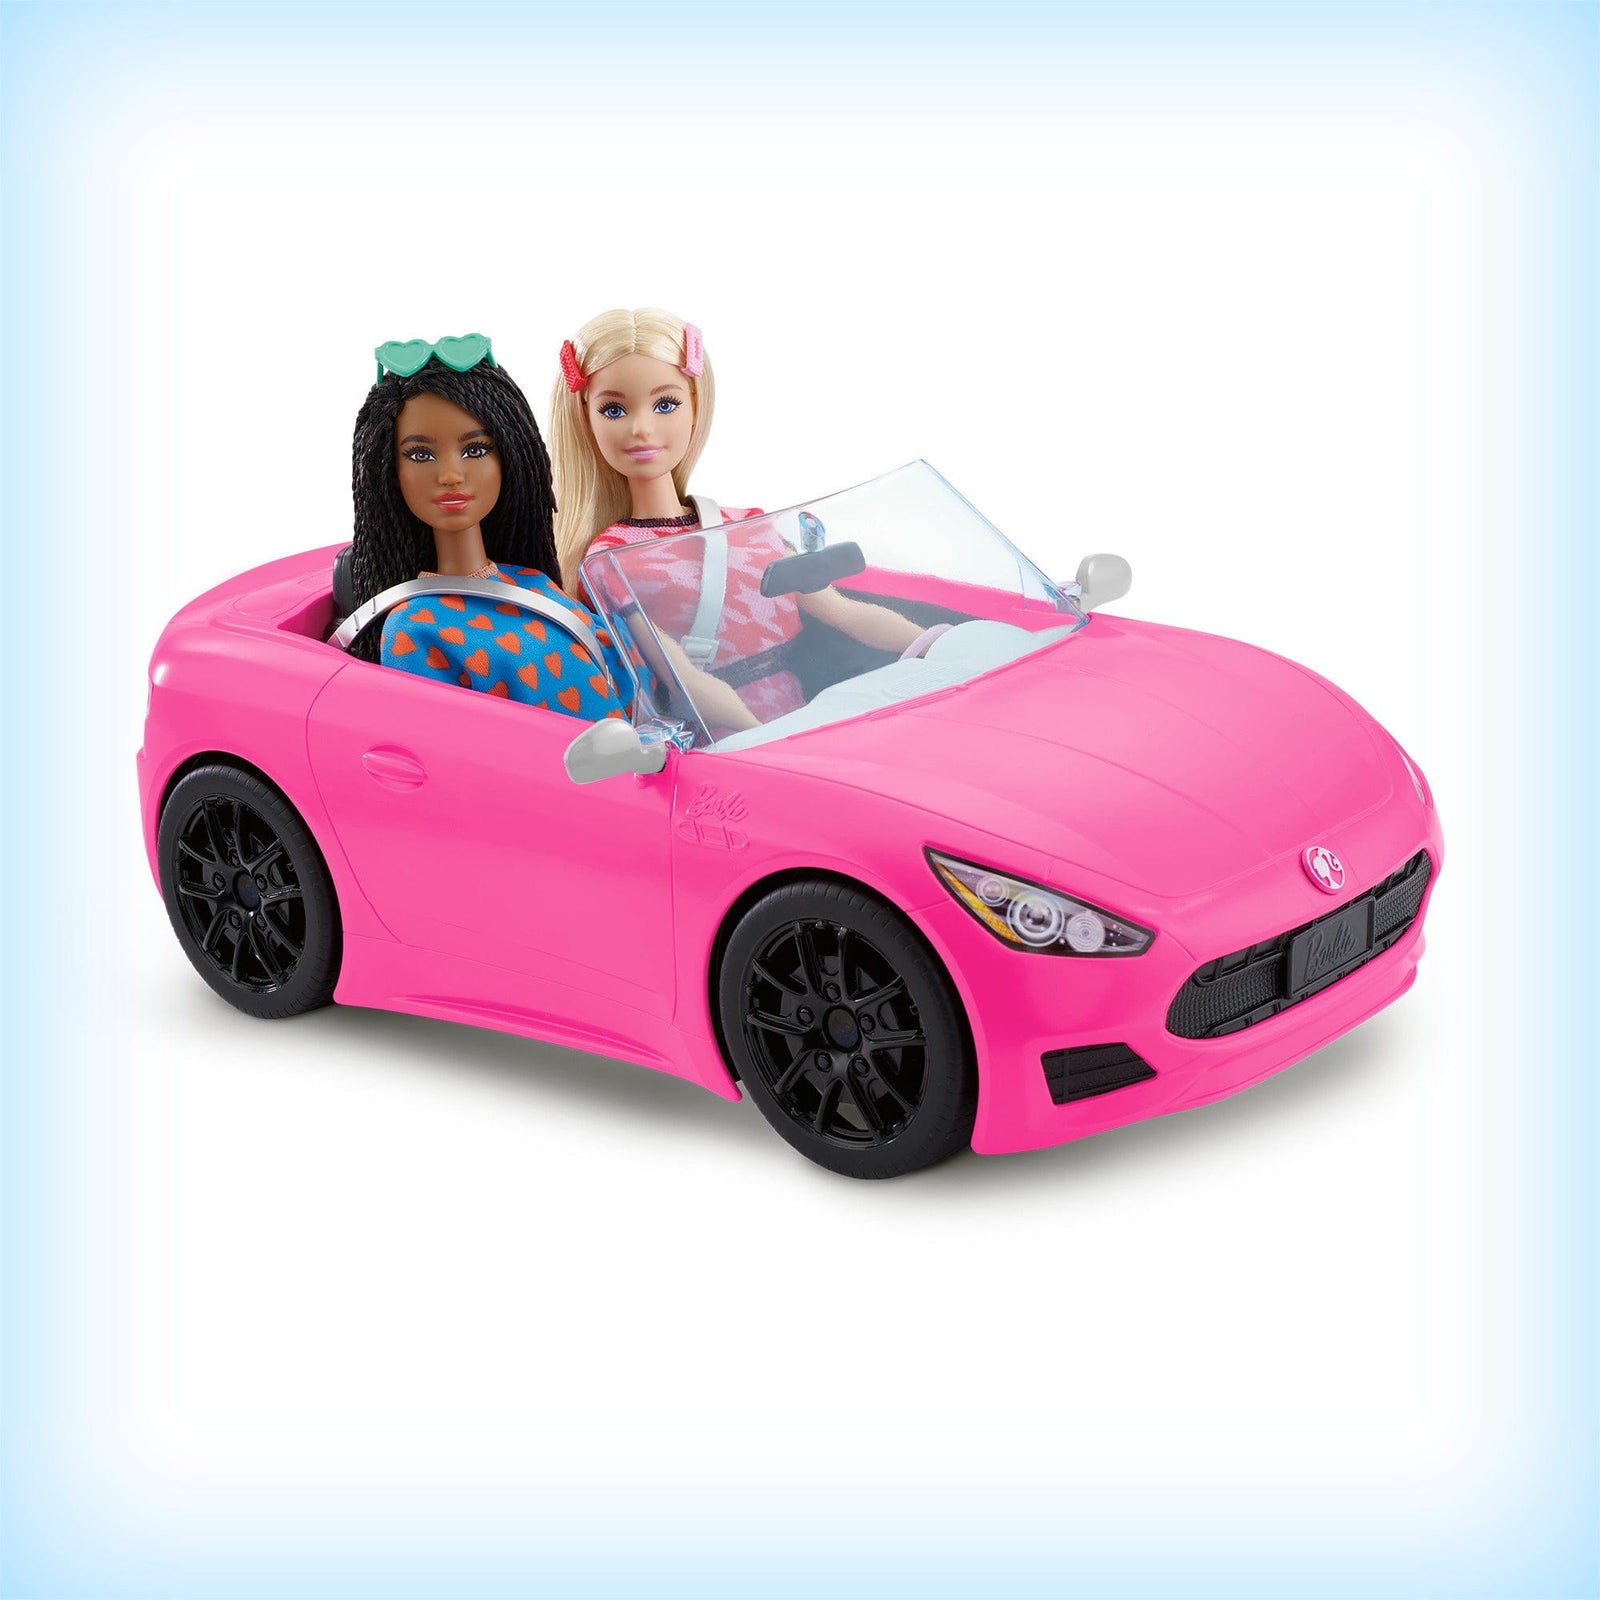 Barbie Pink Convertible Vehicle Toy with Rolling Wheels